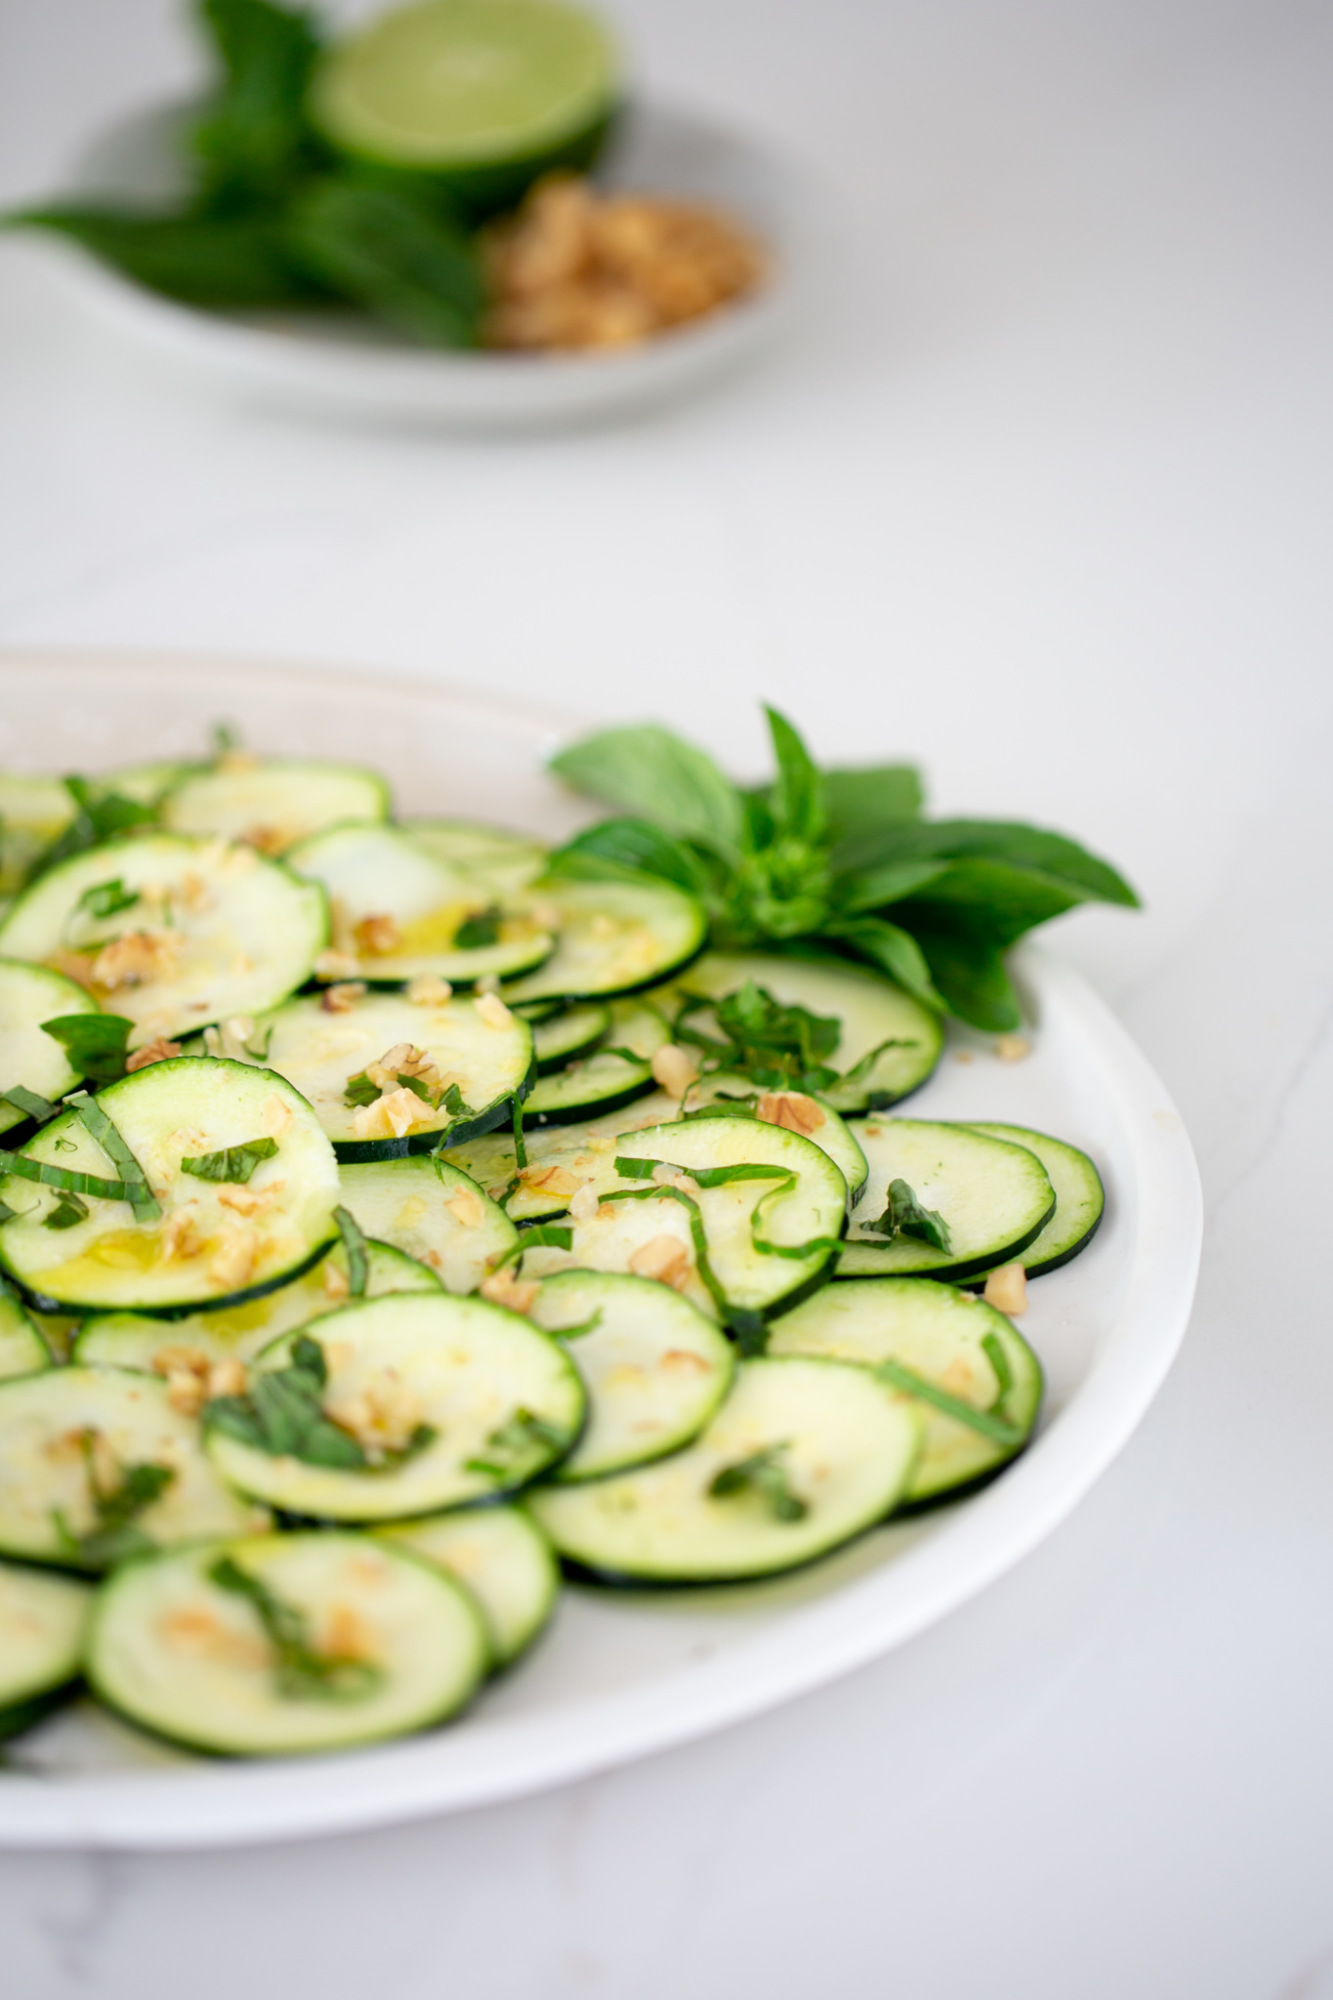 Zucchini carpaccio topped with extra virgin olive oil